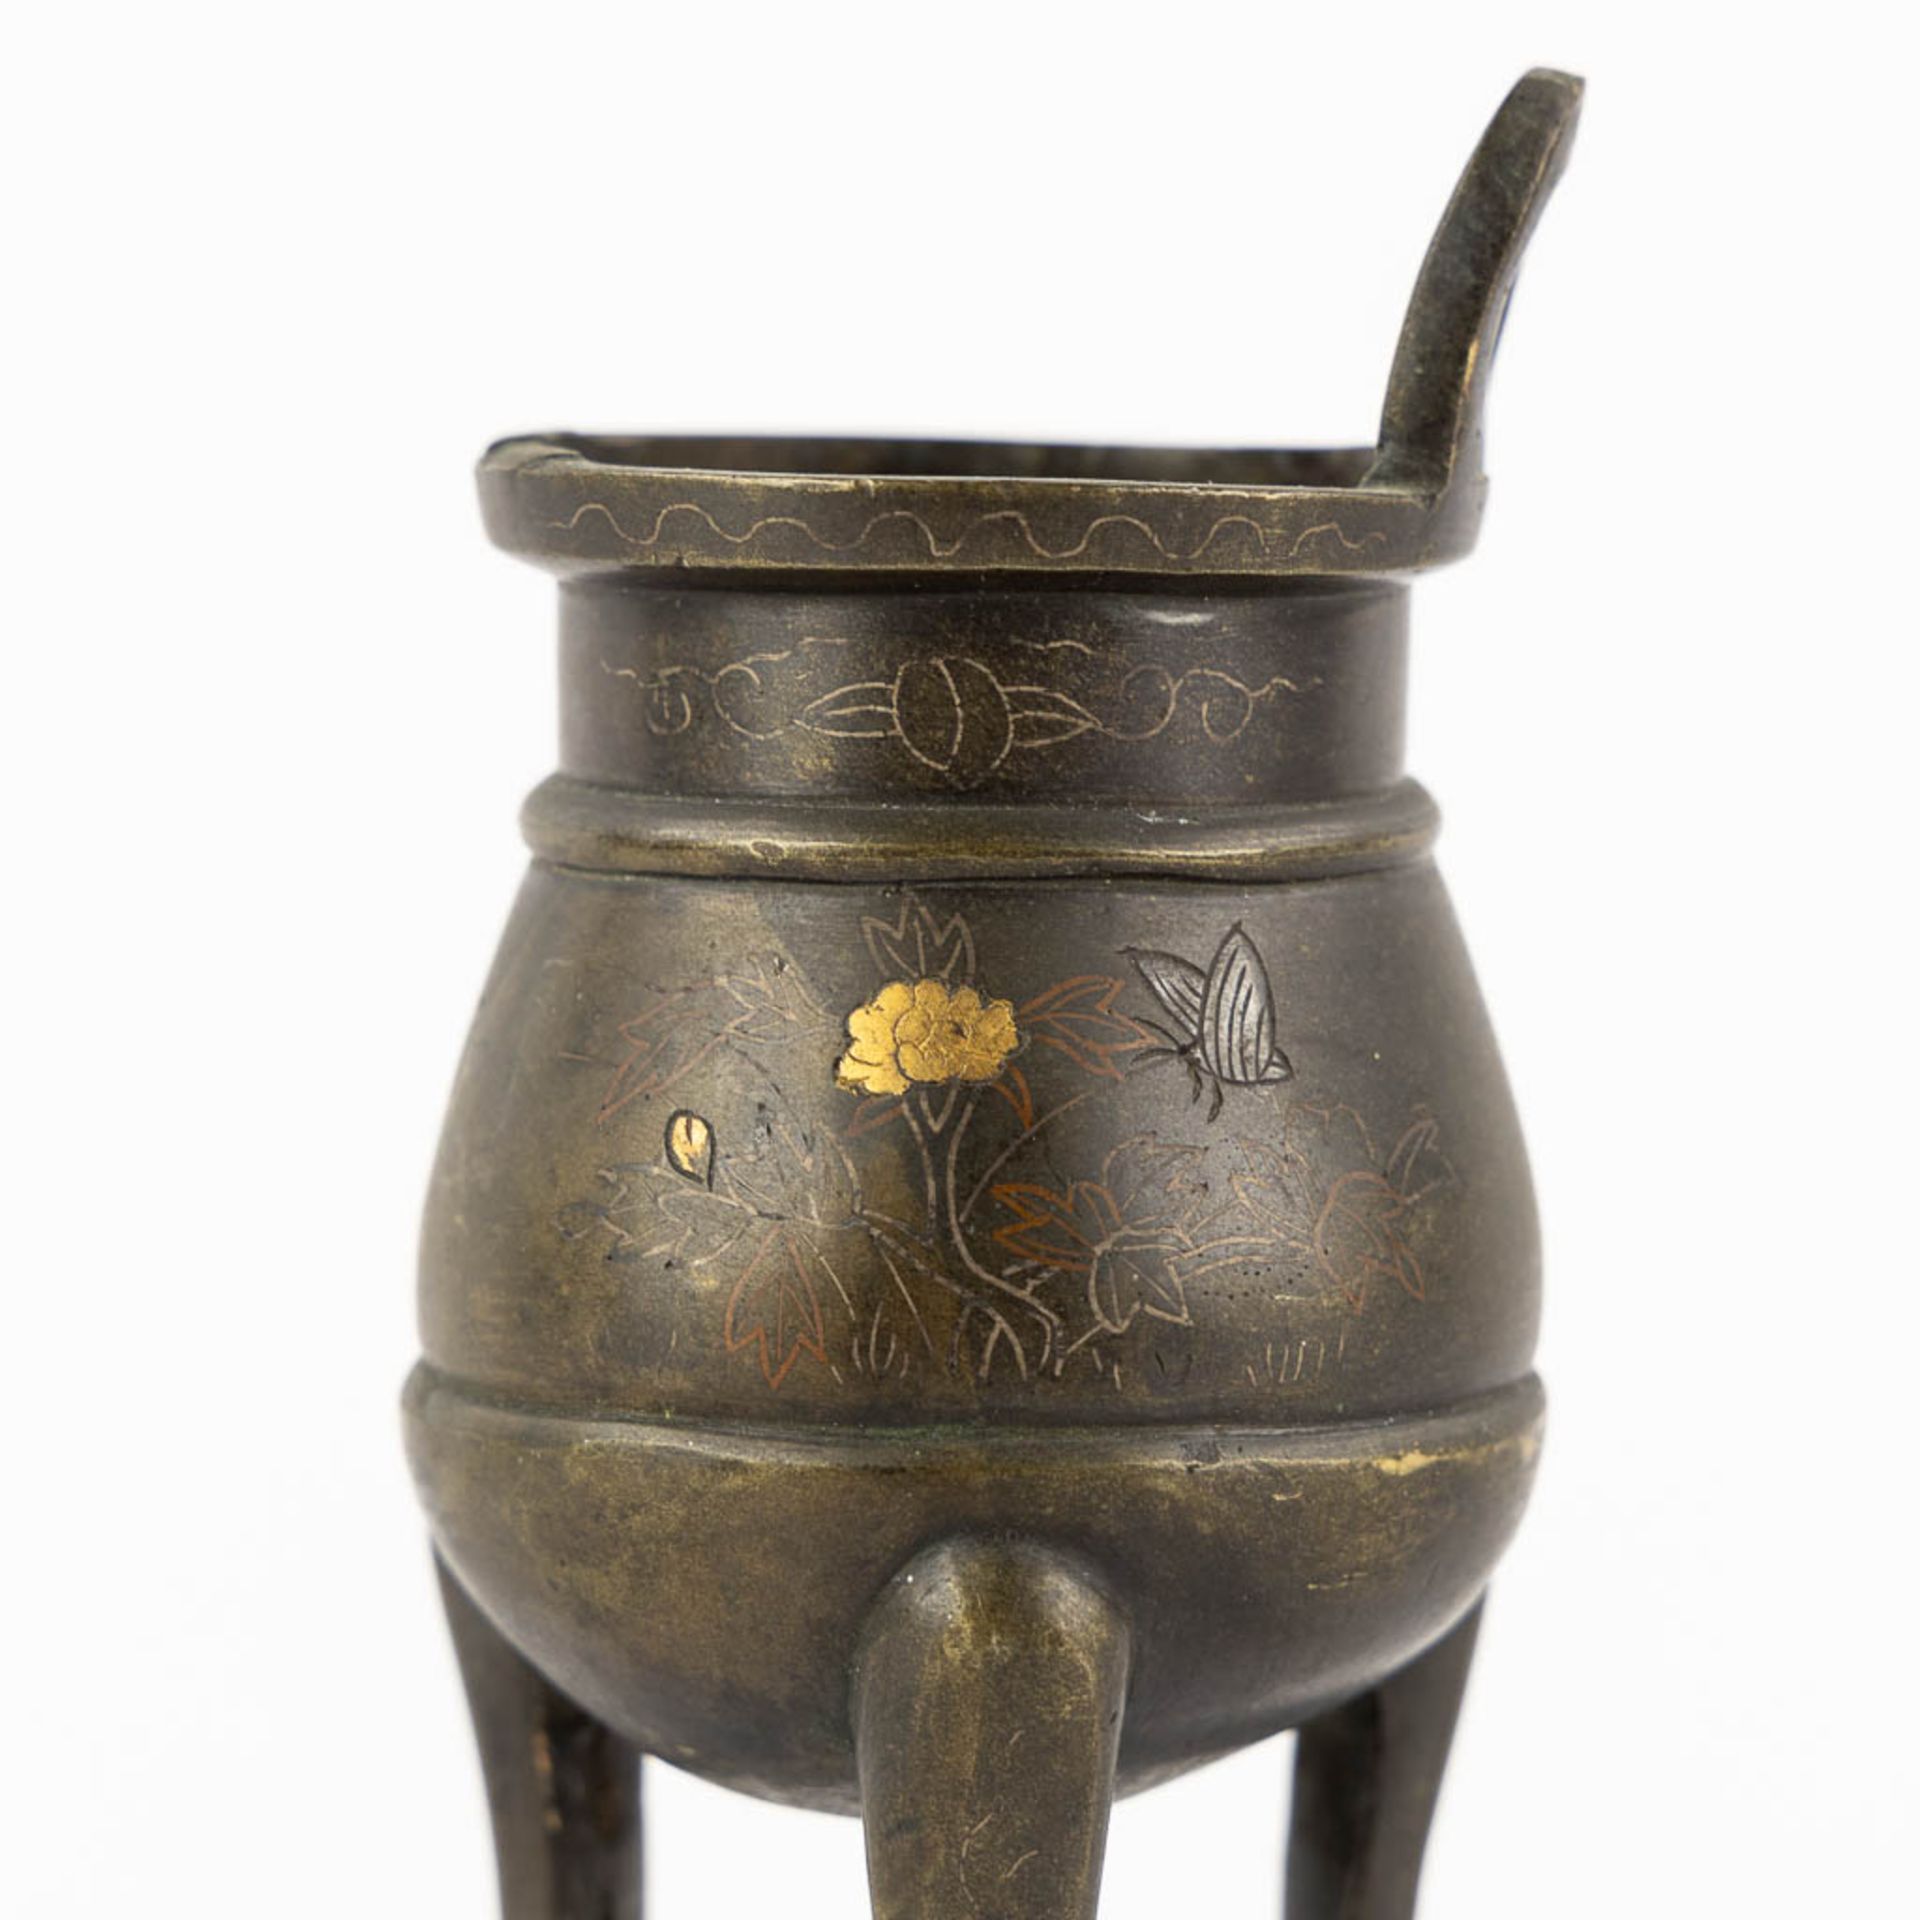 A Chinese insence burner, vase and a lucky coin. Bronze. (H:19 x D:5 cm) - Image 16 of 19